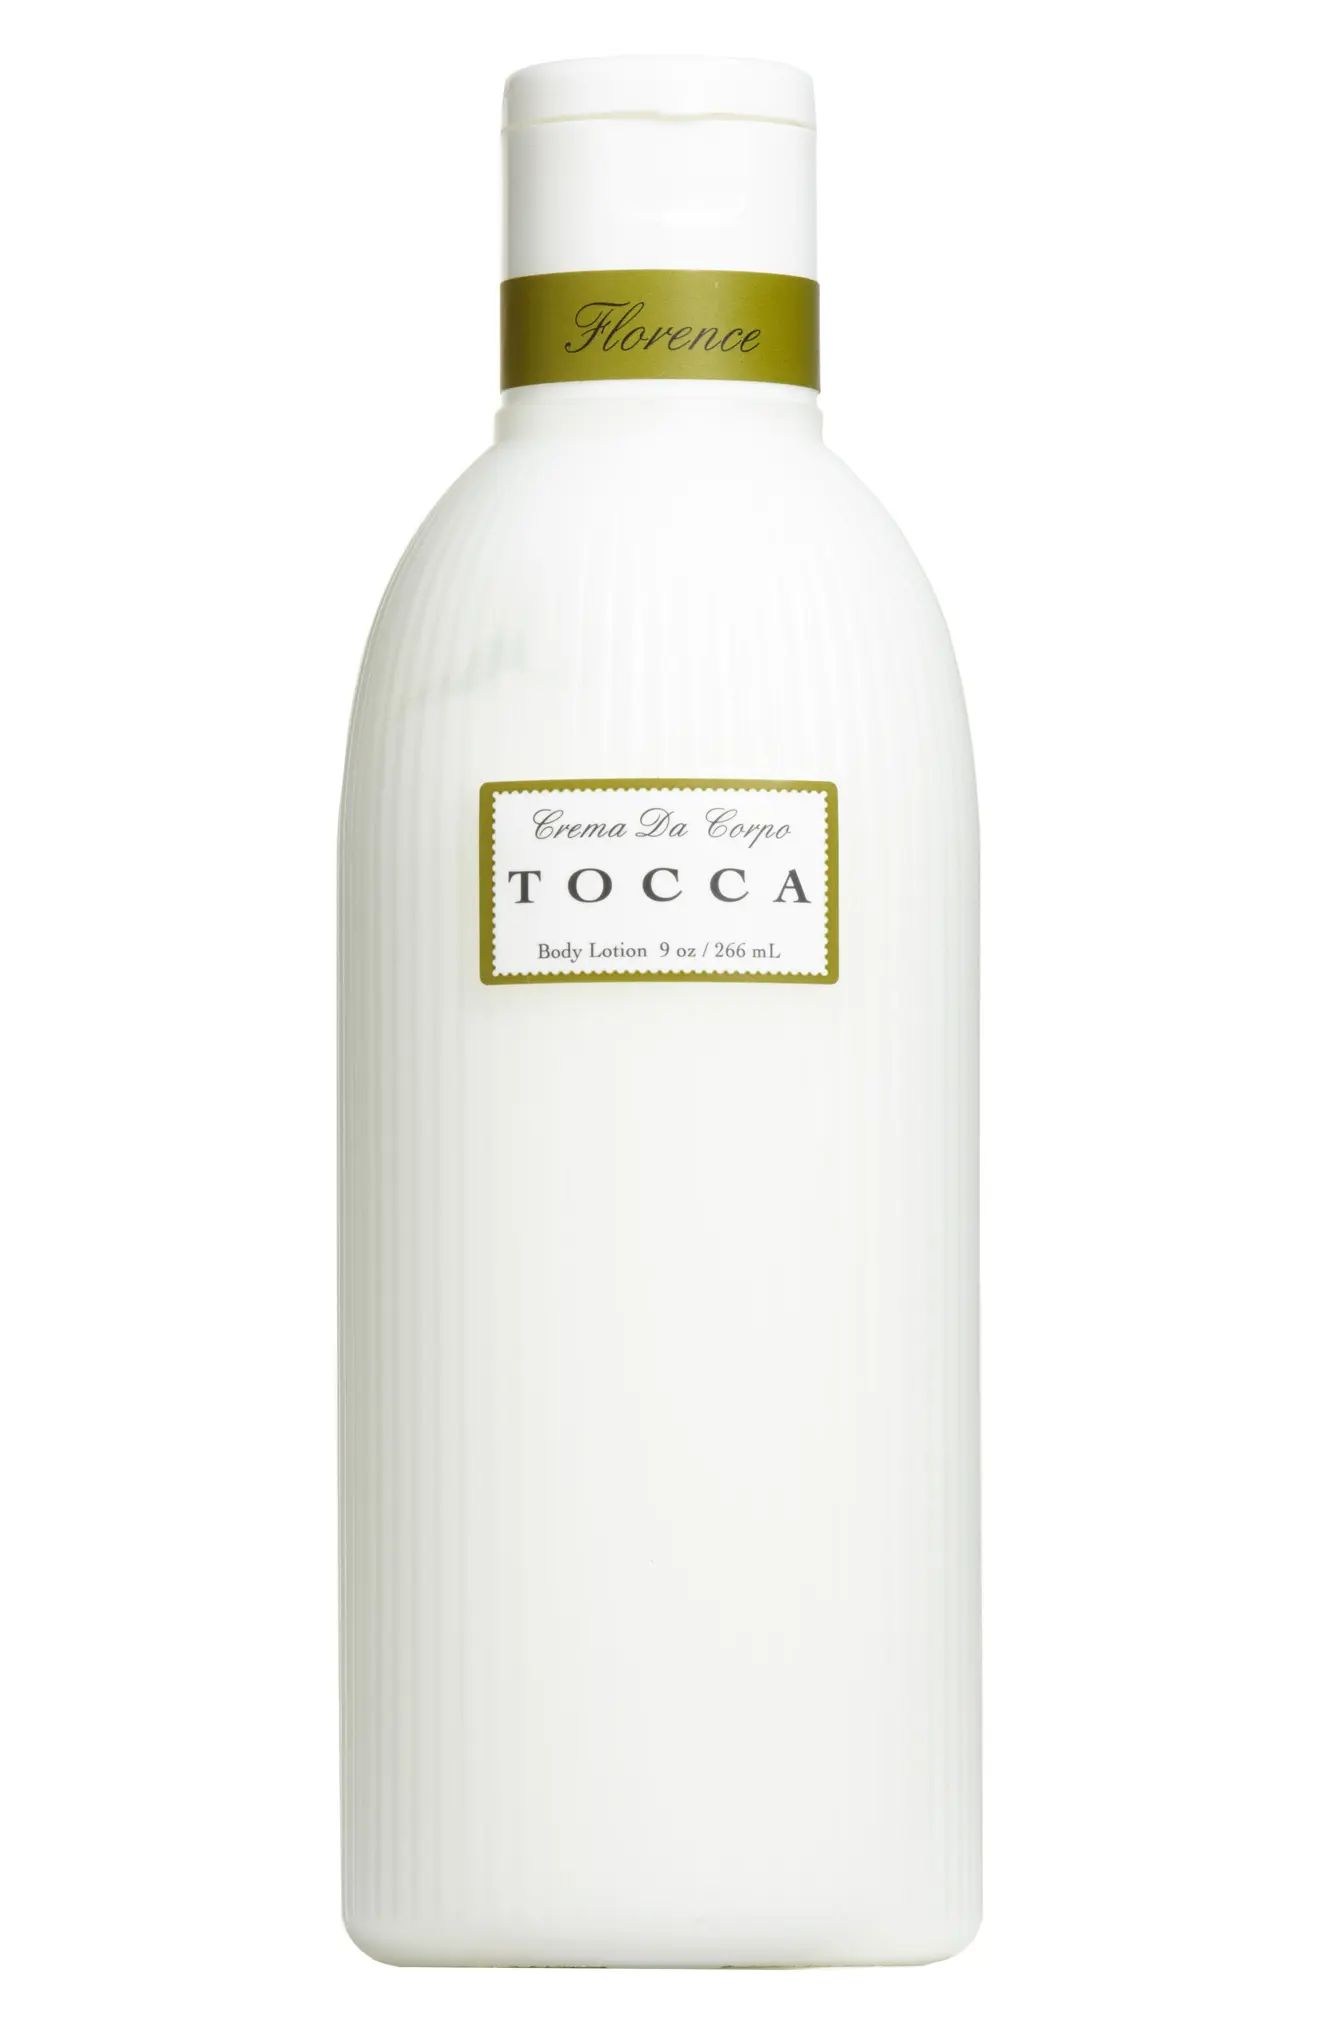 TOCCA Florence Body Lotion at Nordstrom, Size 9 Oz | Nordstrom